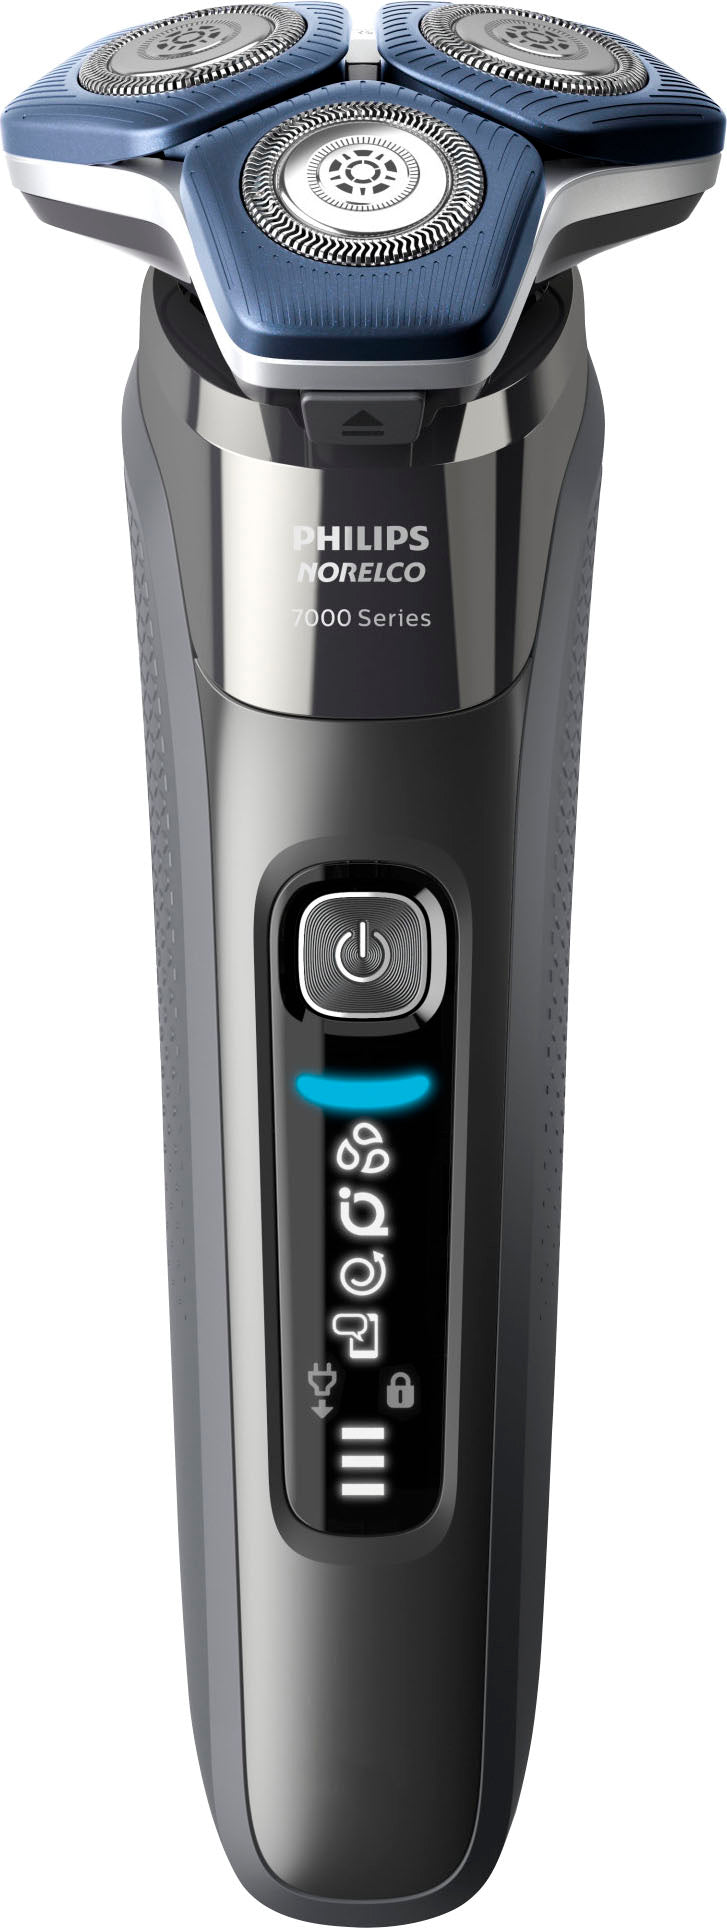 Philips Norelco Shaver 7200, Rechargeable Wet & Dry Electric Shaver with SenseIQ Technology and Pop-up Trimmer S7887/82 - Black_0